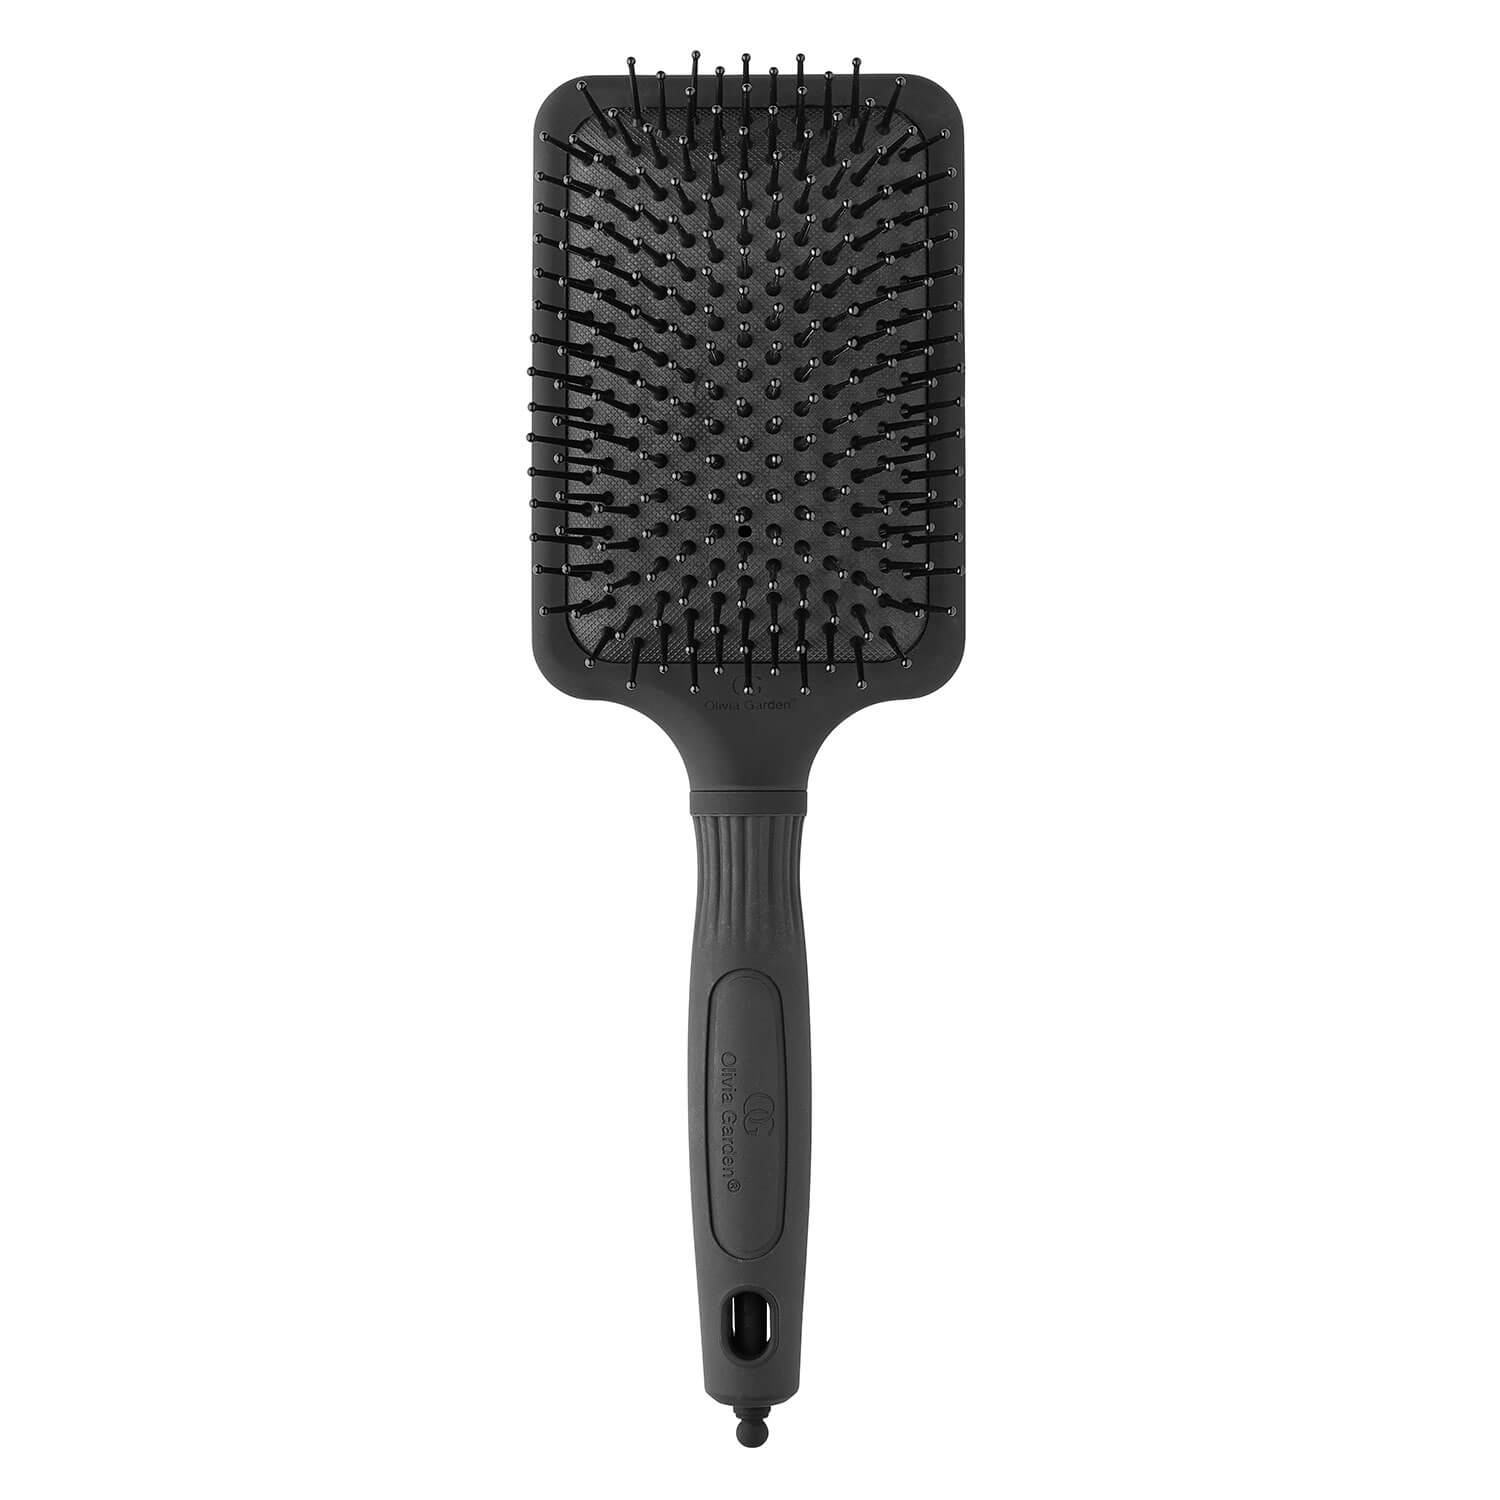 Product image from Olivia Garden - Black Label Paddle